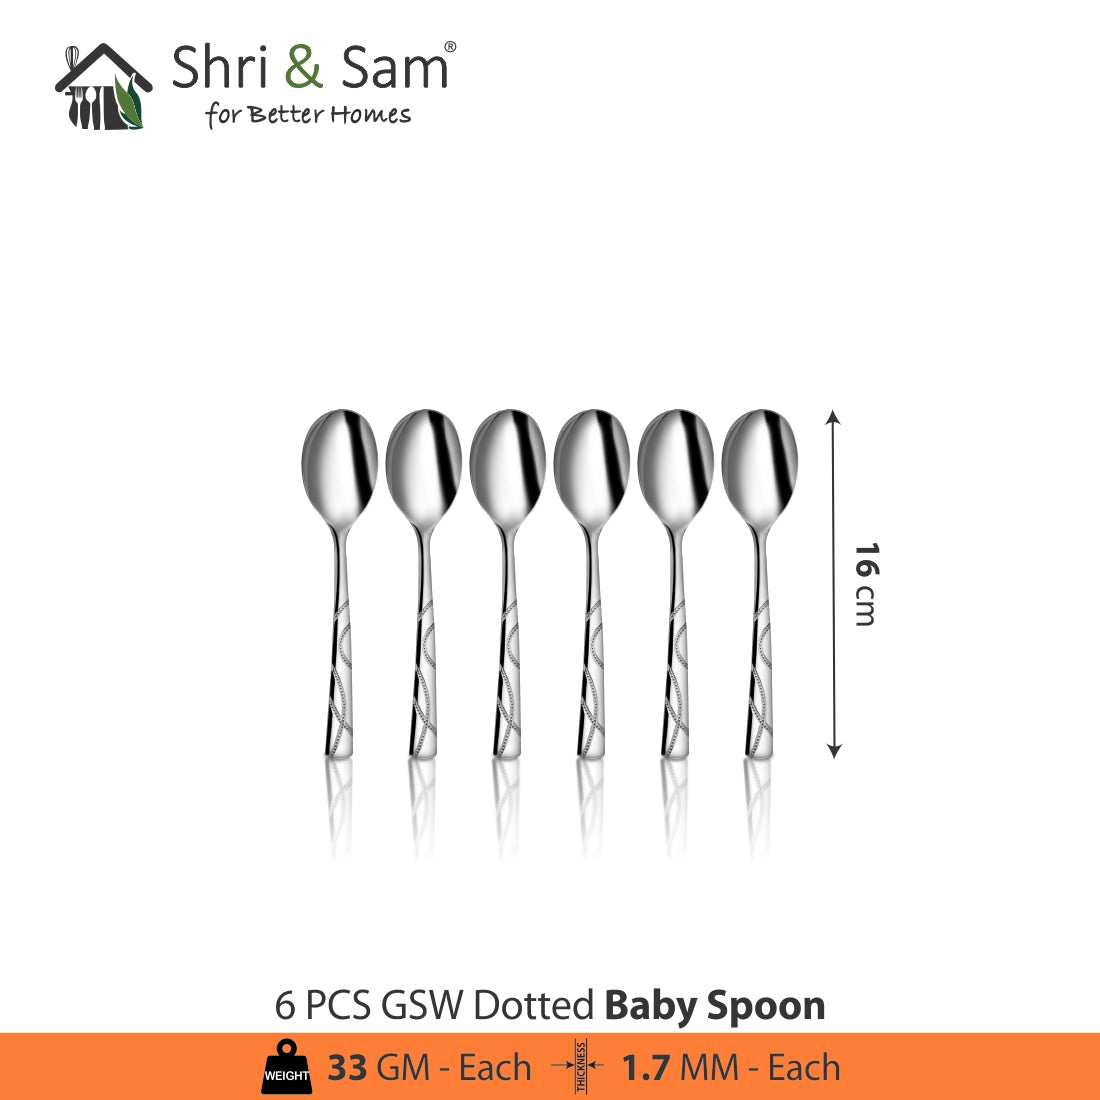 Stainless Steel Cutlery GSW Dotted